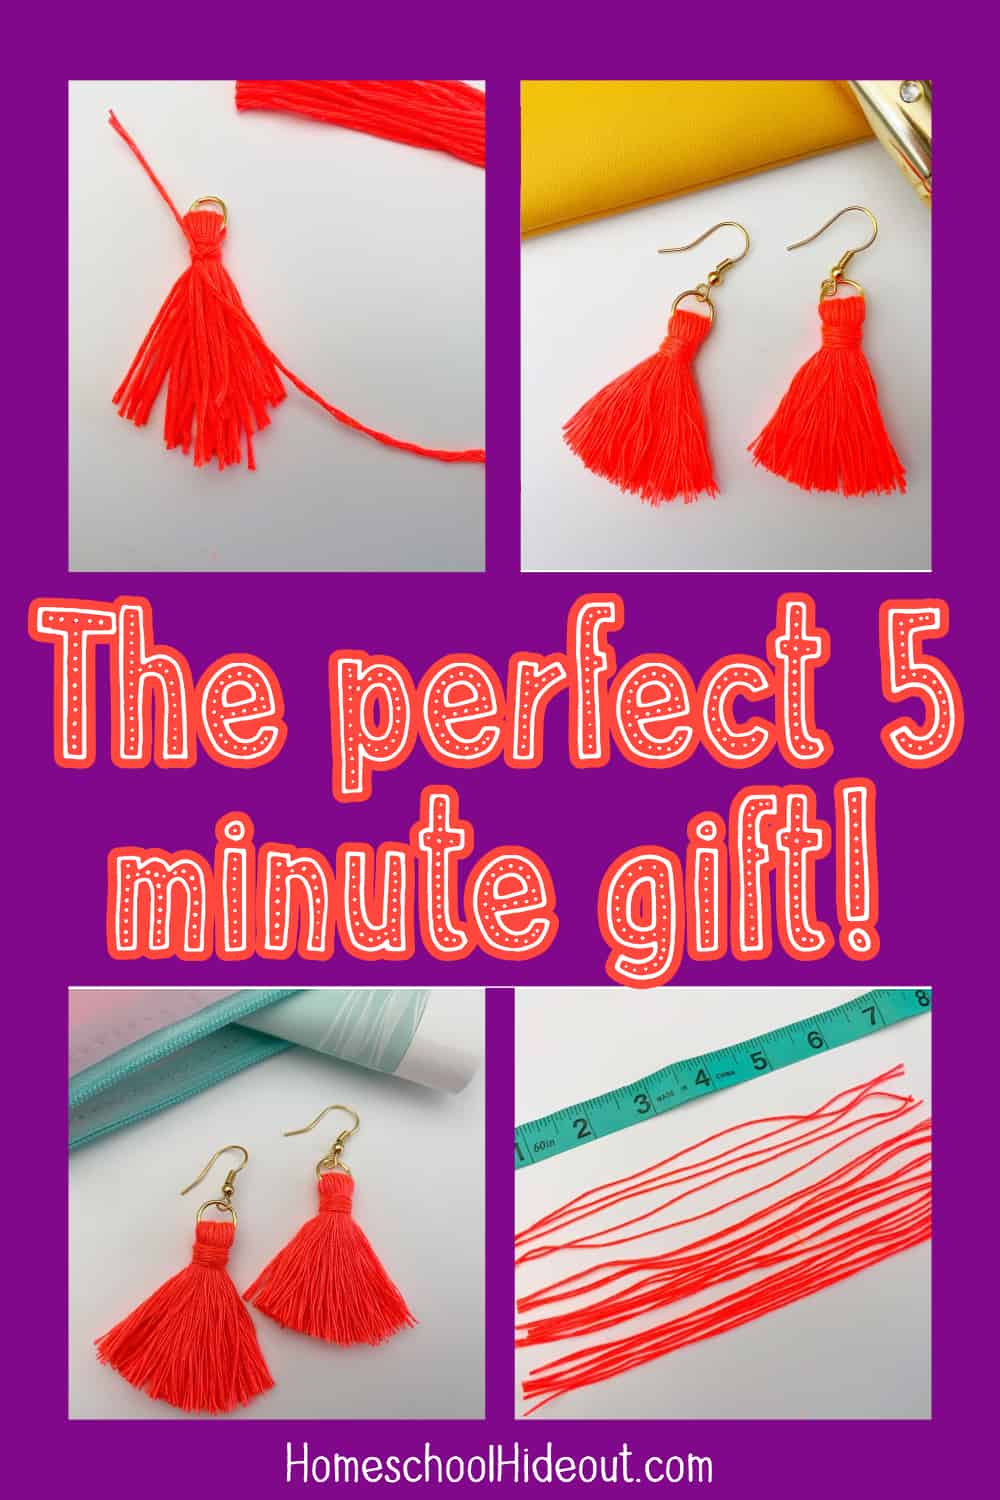 These DIY tassel earrings are so simple, kids can make them! They're the perfect gift, too!